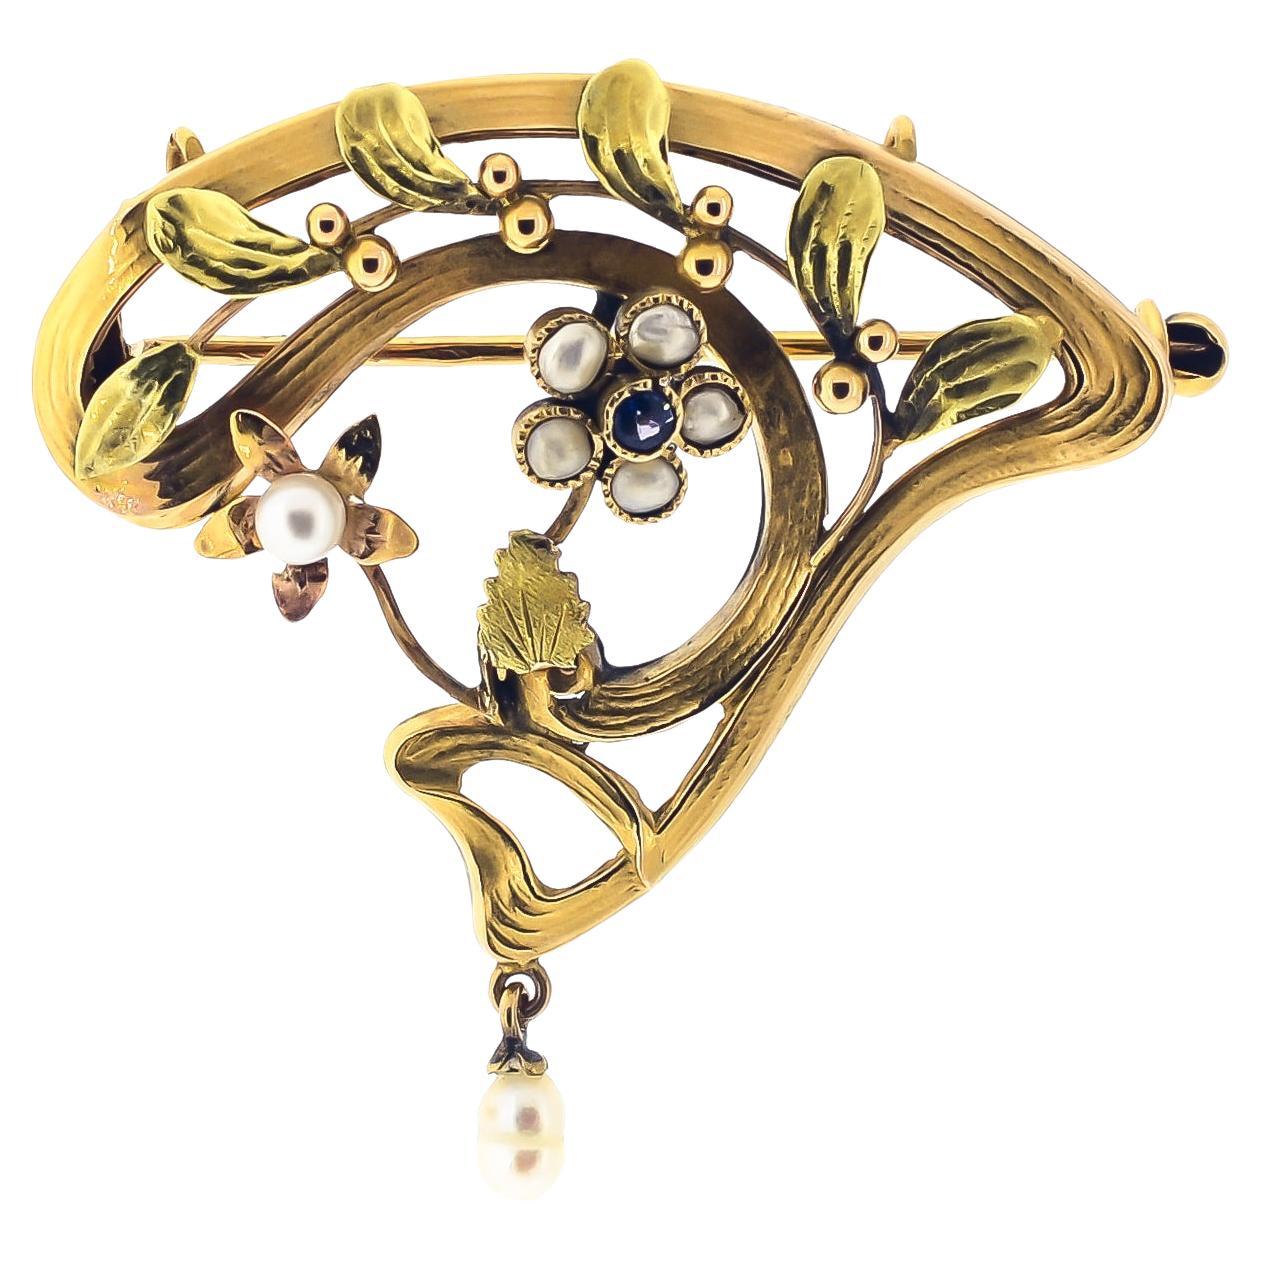 Lovely  Art Nouveau 18kt Yellow Gold, Sapphire, and Pearl French Brooch